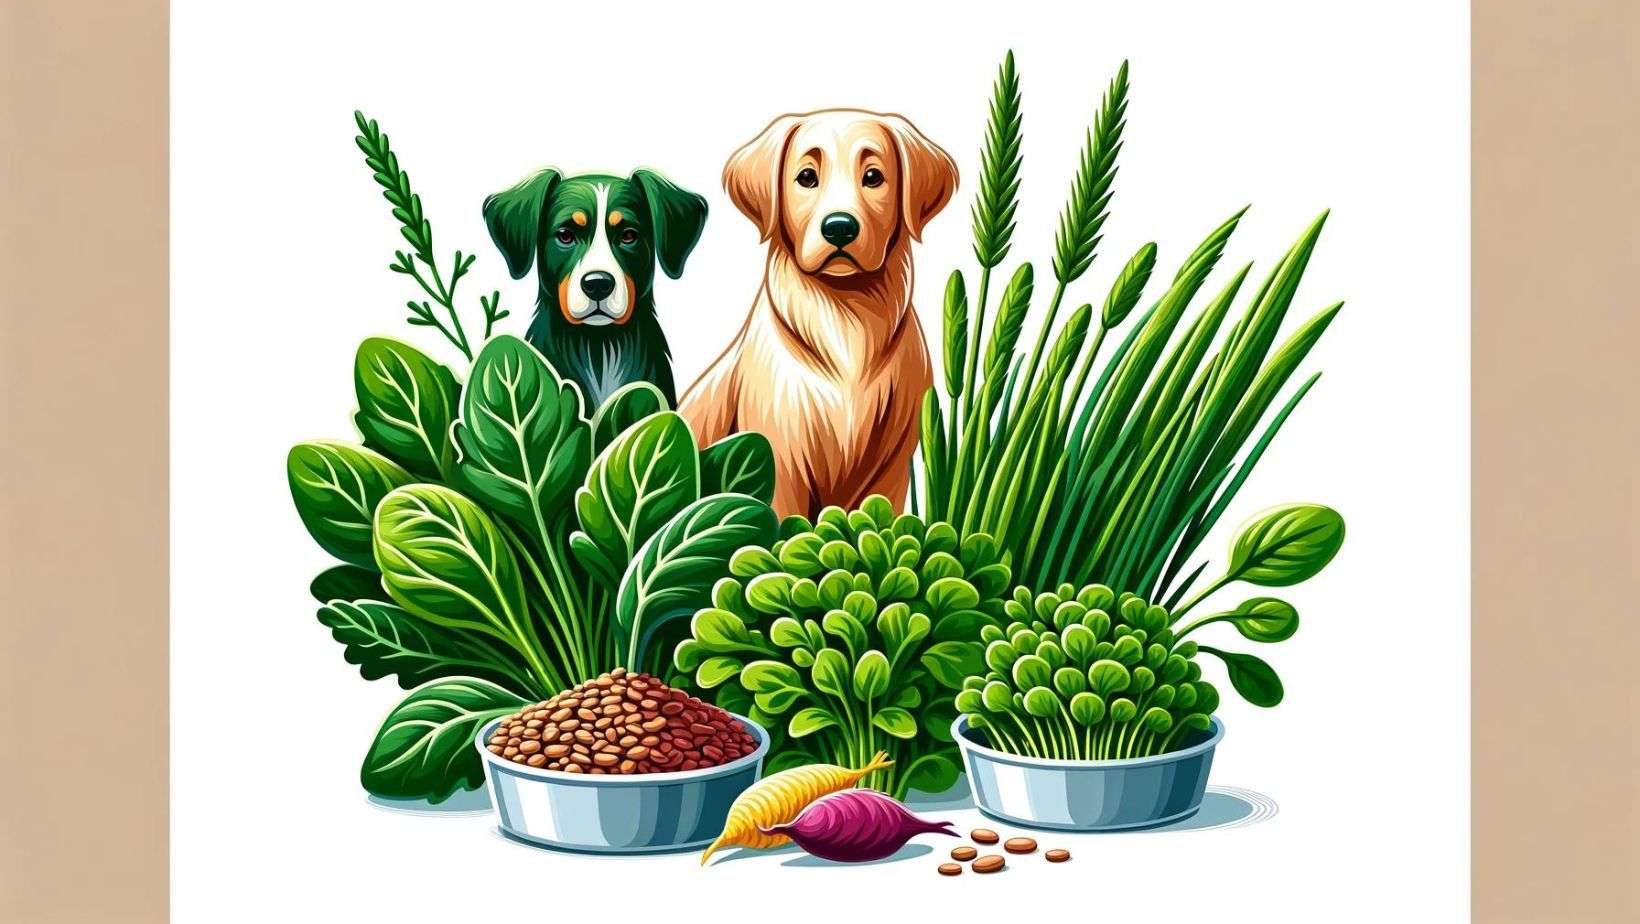 Illustration of a variety of microgreens like kale, spinach, and wheatgrass, symbolizing their nutritional benefits for dogs.